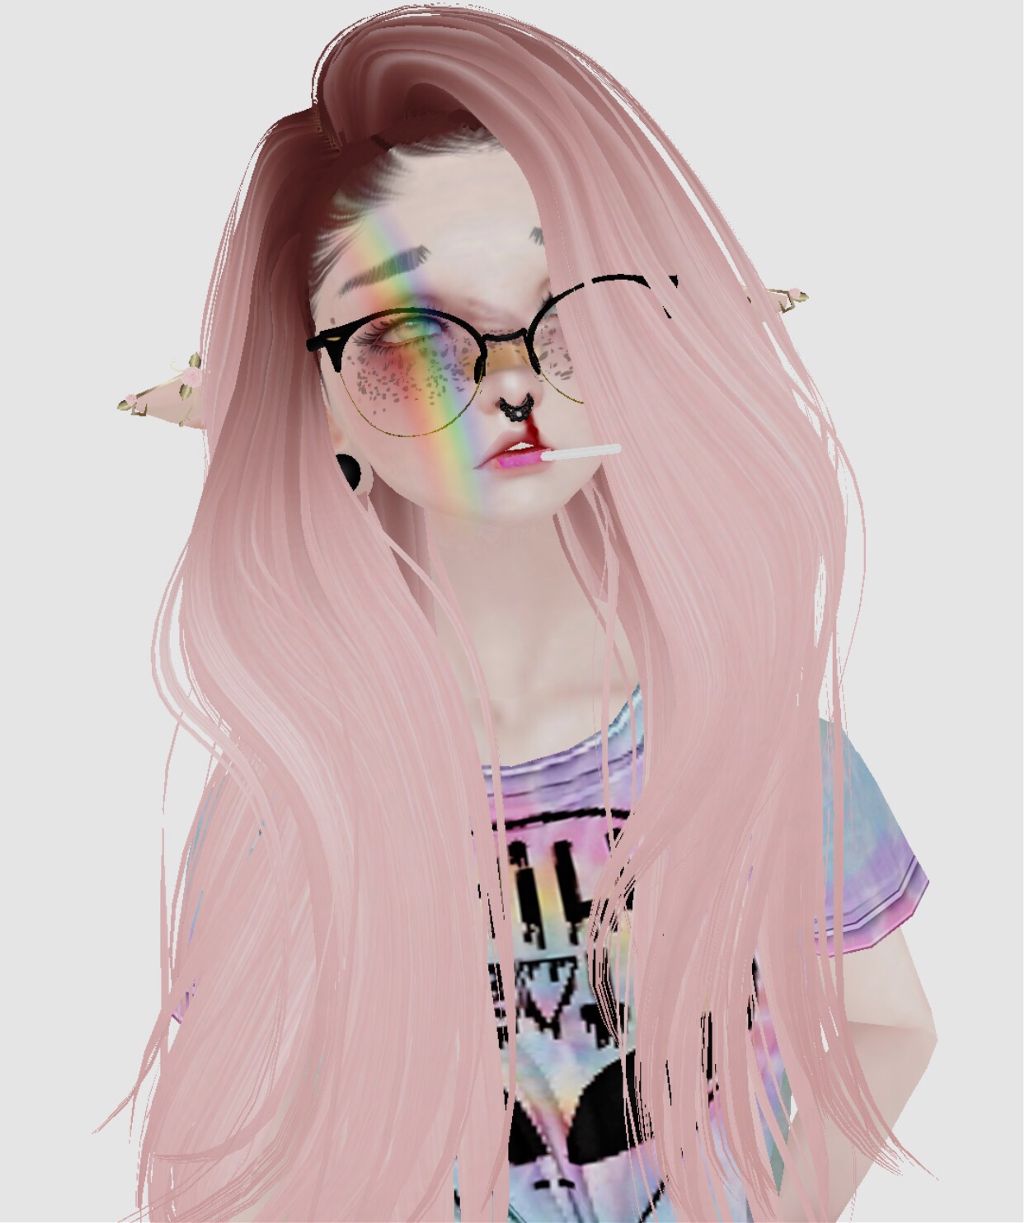 Aesthetic Girl With Glasses Drawing - Largest Wallpaper Portal